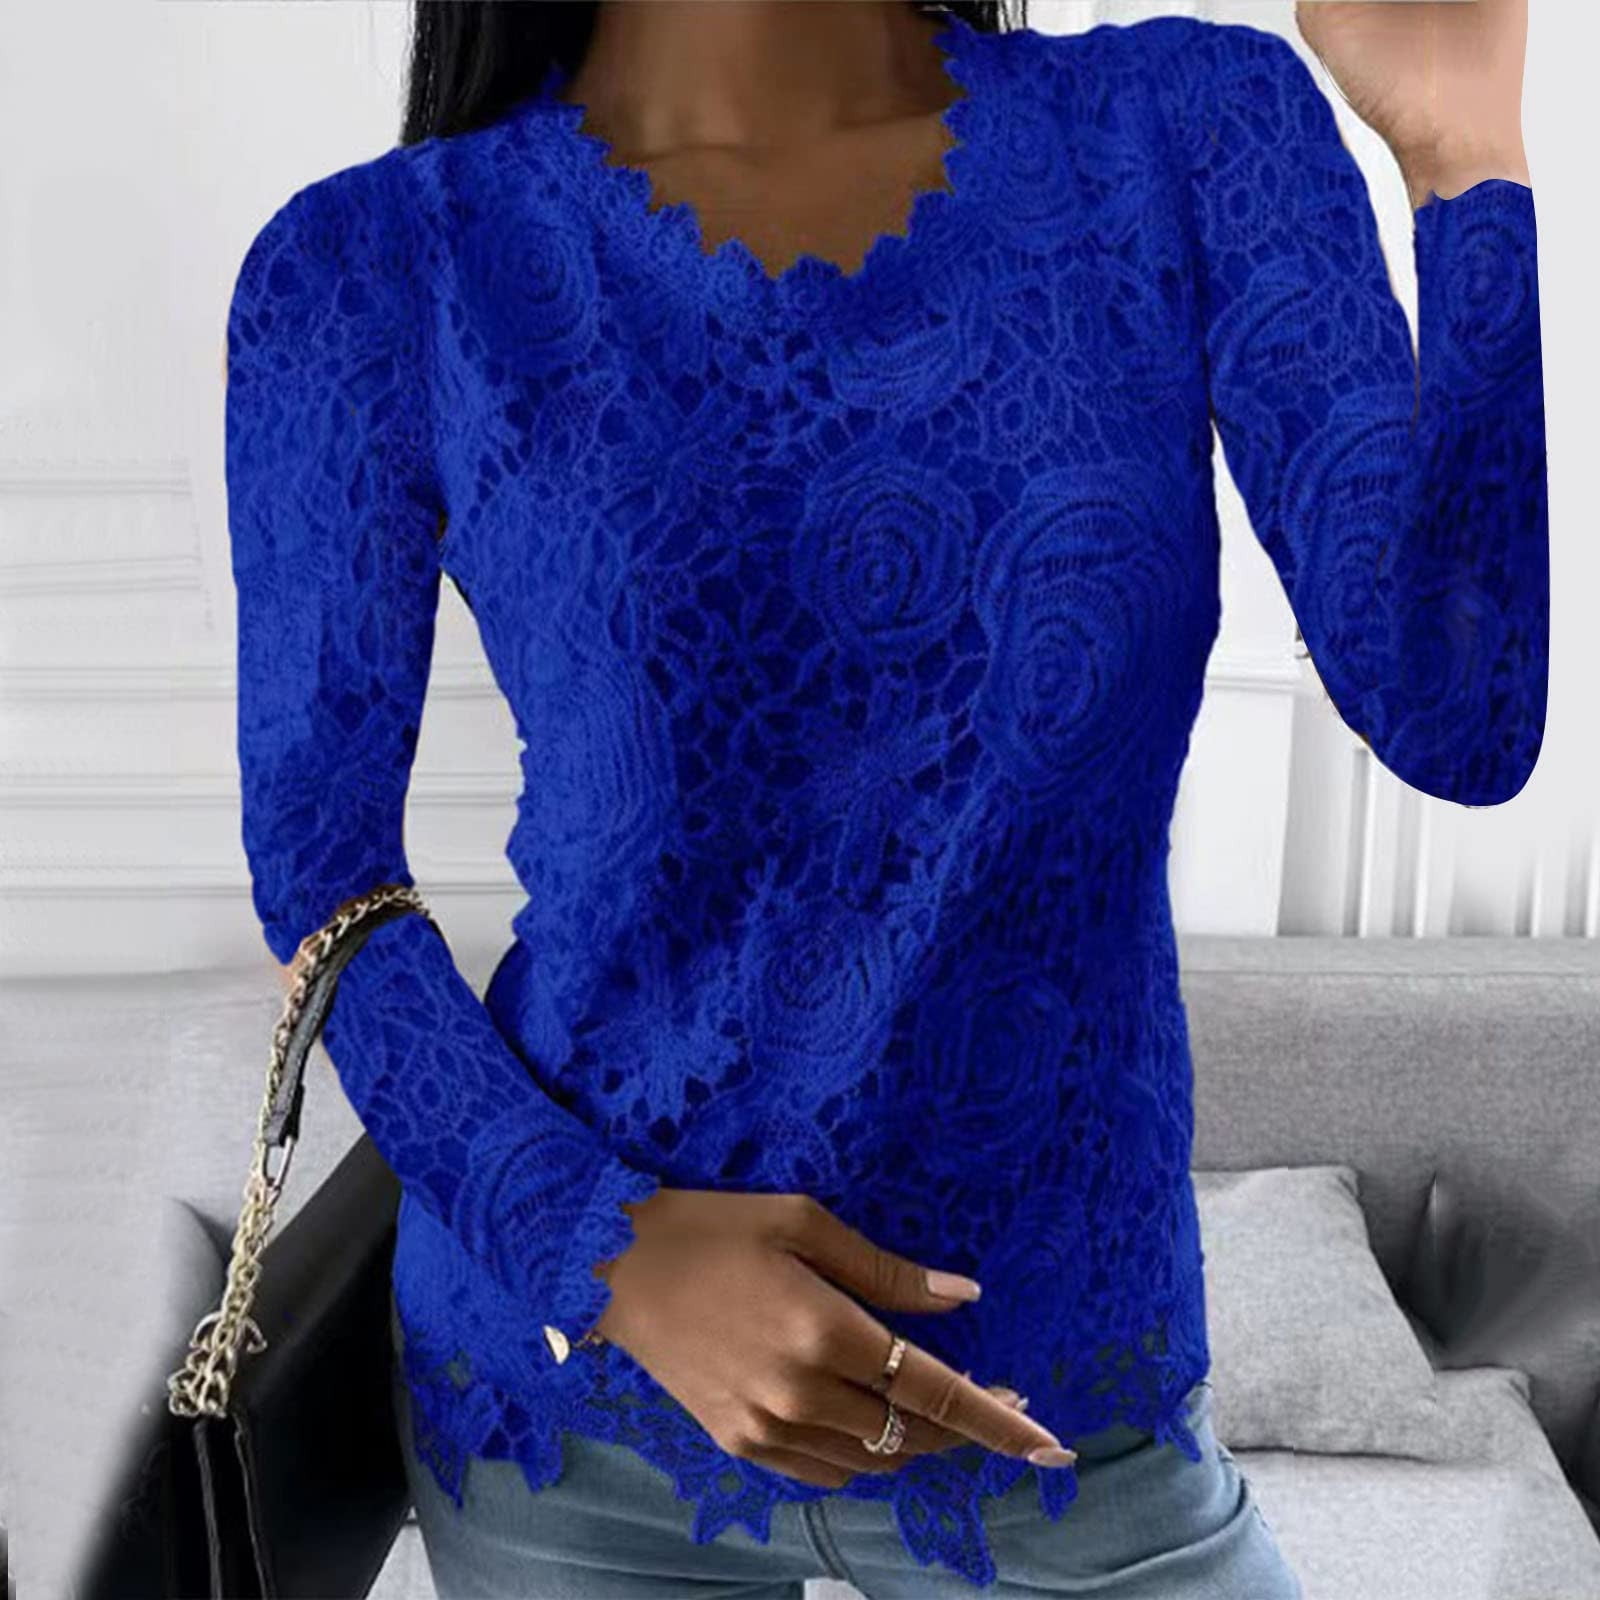 tklpehg Dressy Tops for Women Lace Slim Fit Blouse Round Neck